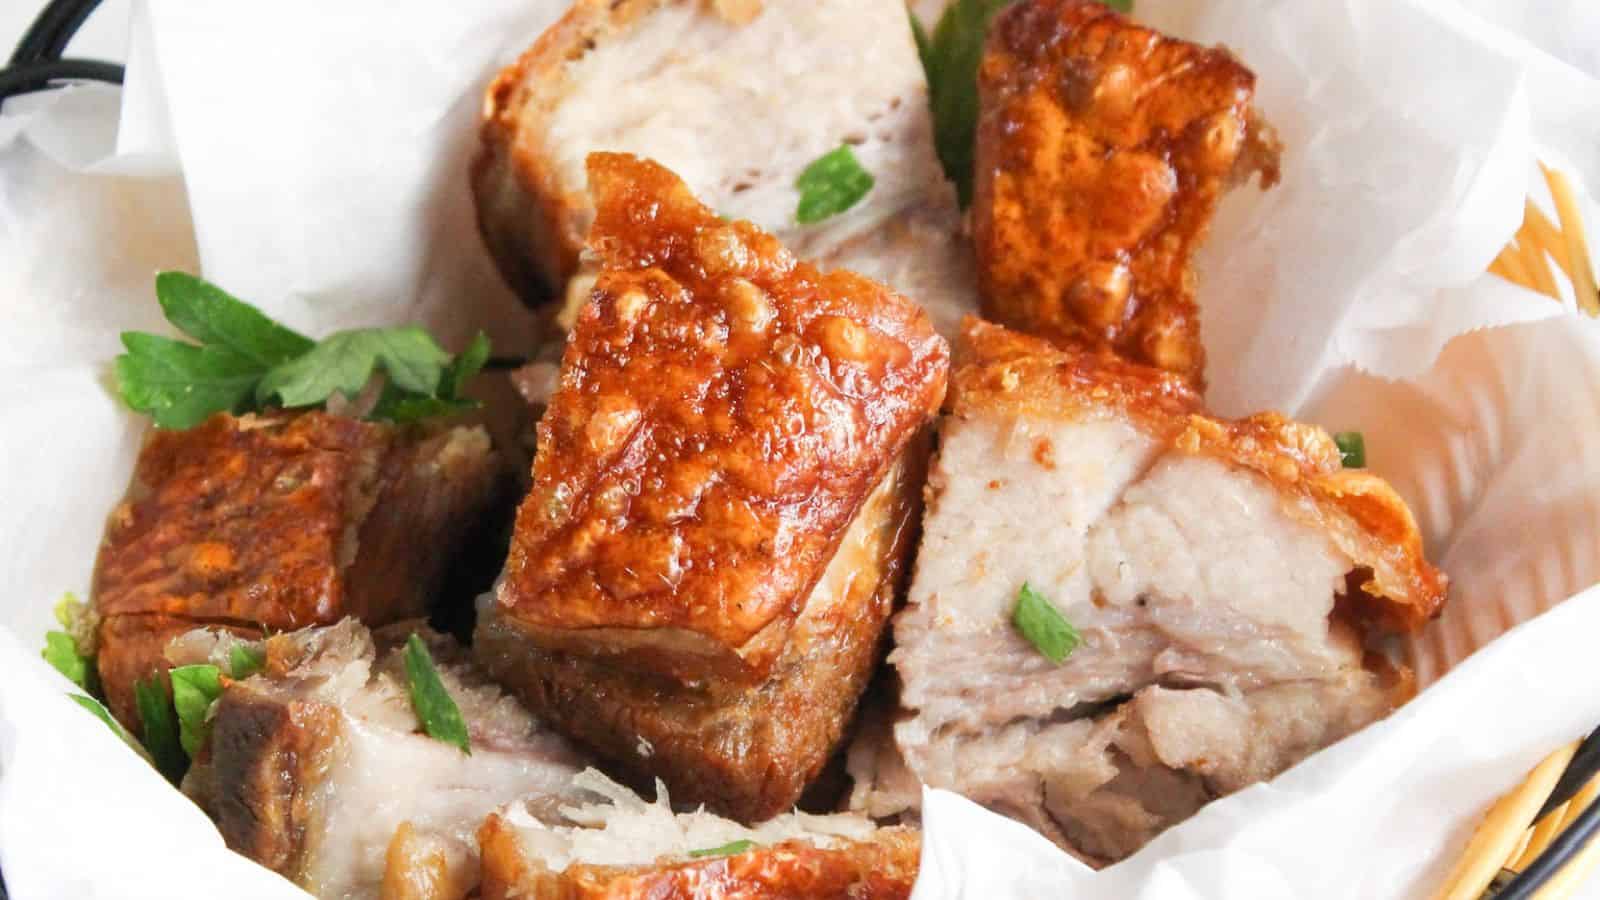 A basket of crispy roasted pork belly chunks garnished with parsley, served in a white paper-lined wicker basket.